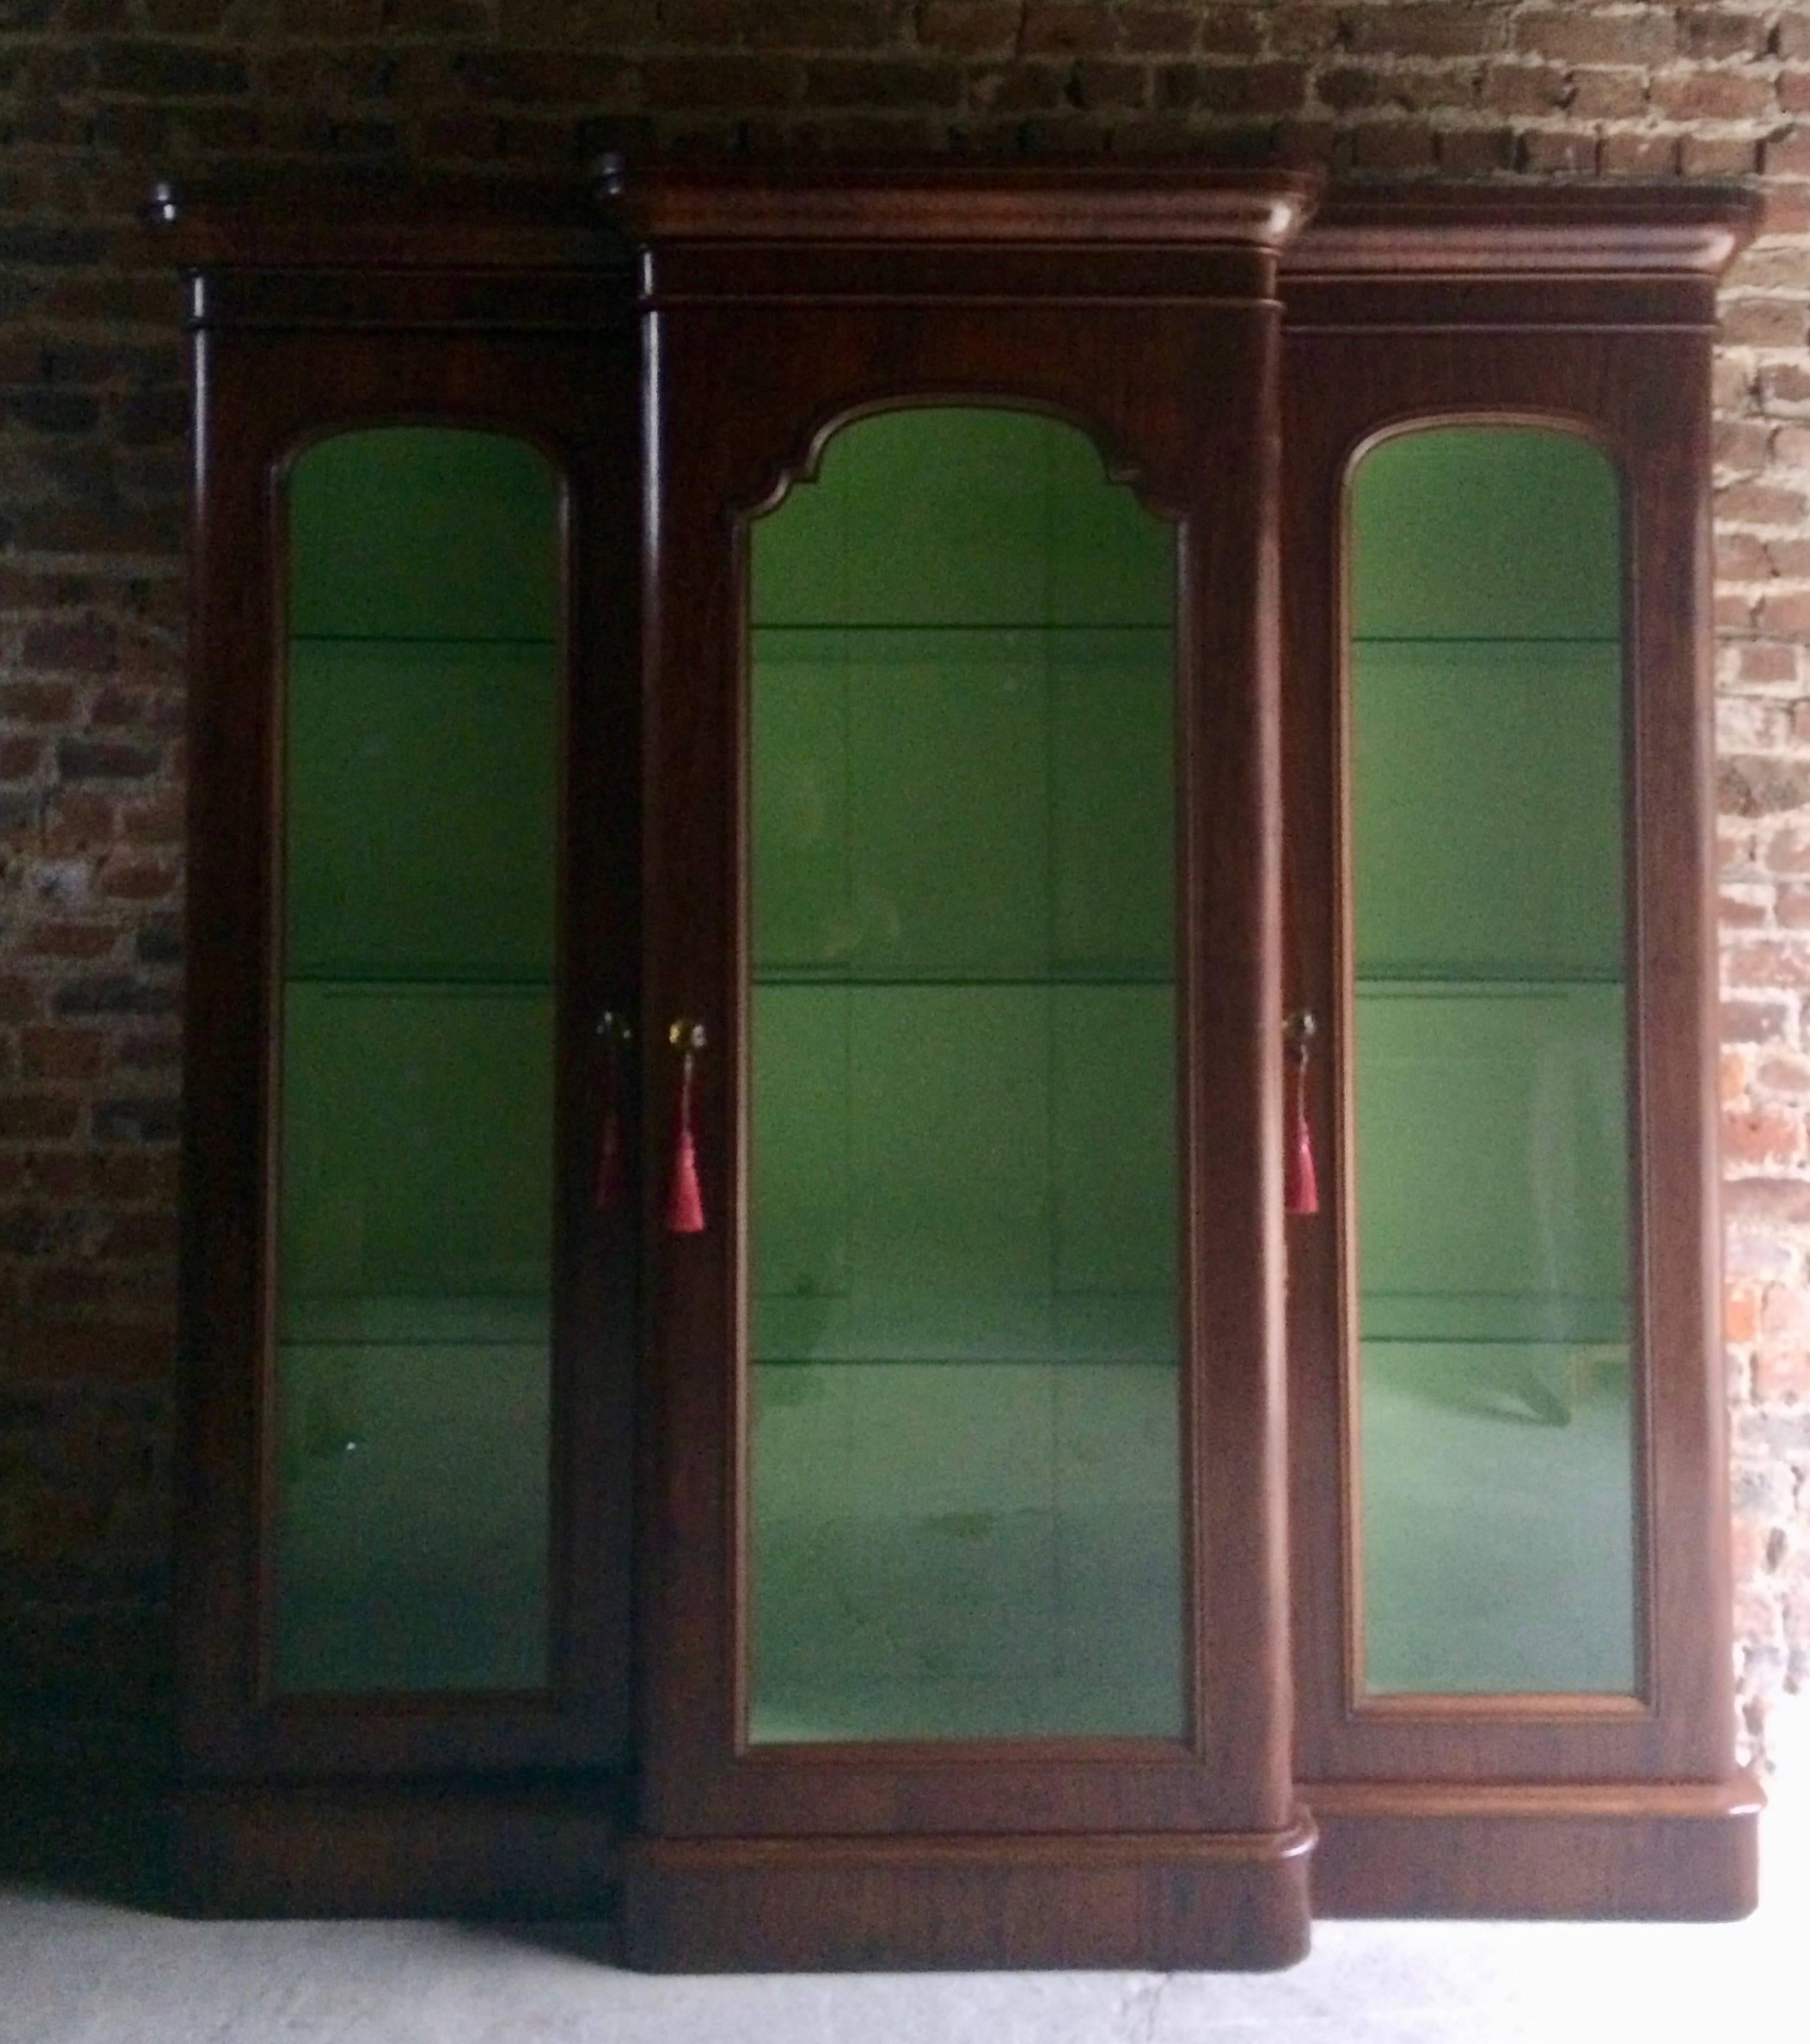 A fabulous large antique Victorian apothecary mahogany shop display cabinet vitrine, circa 1875, the. Corniced top over three glazed doors enclosing a green painted interior each with three glass shelves, comes with three non working keys and